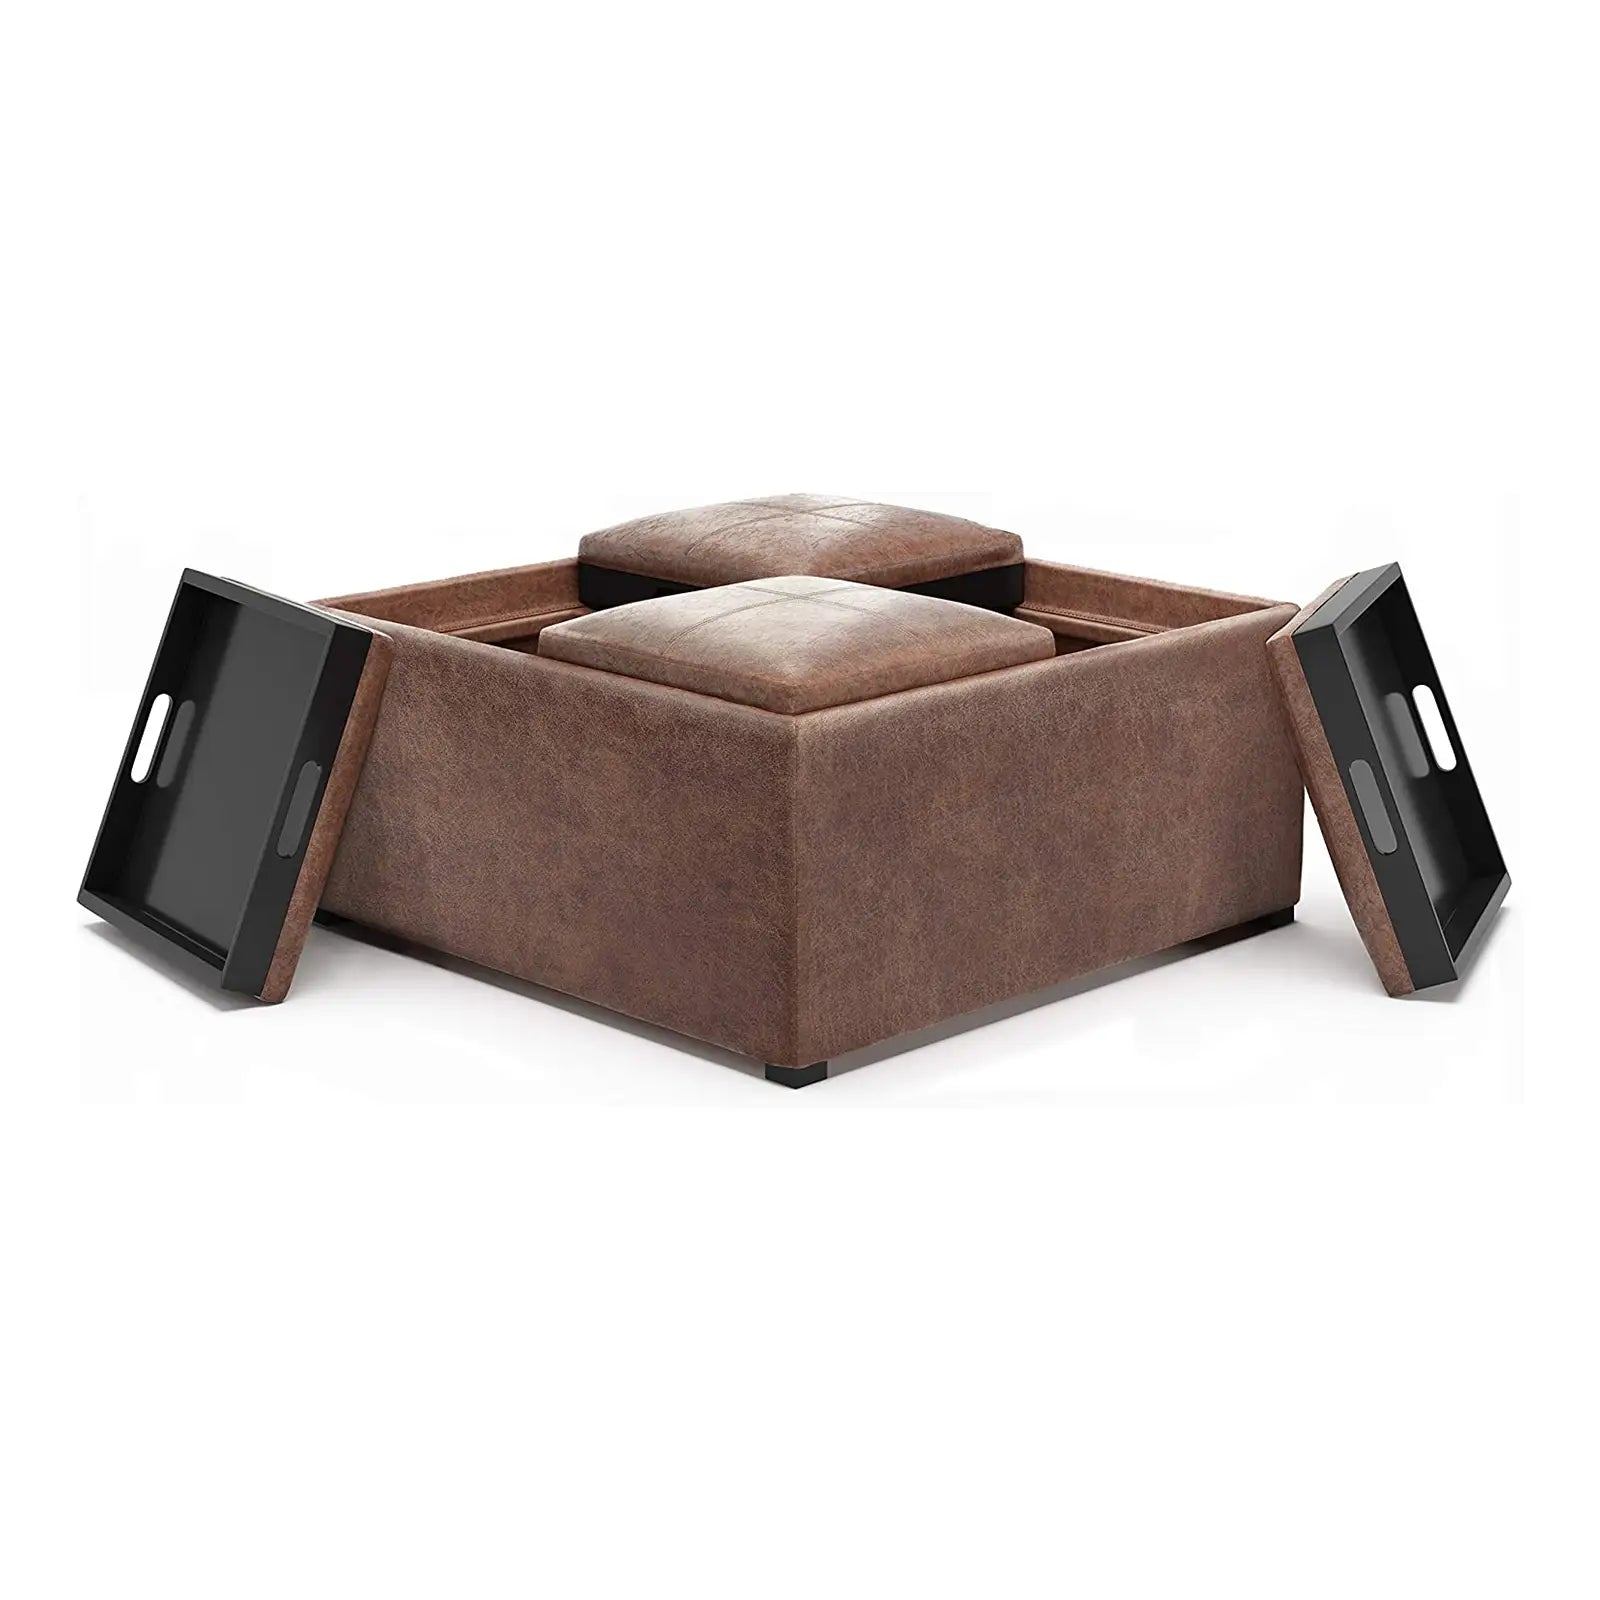 Coffee Table Lift Top Upholstered Storage Square Ottoman